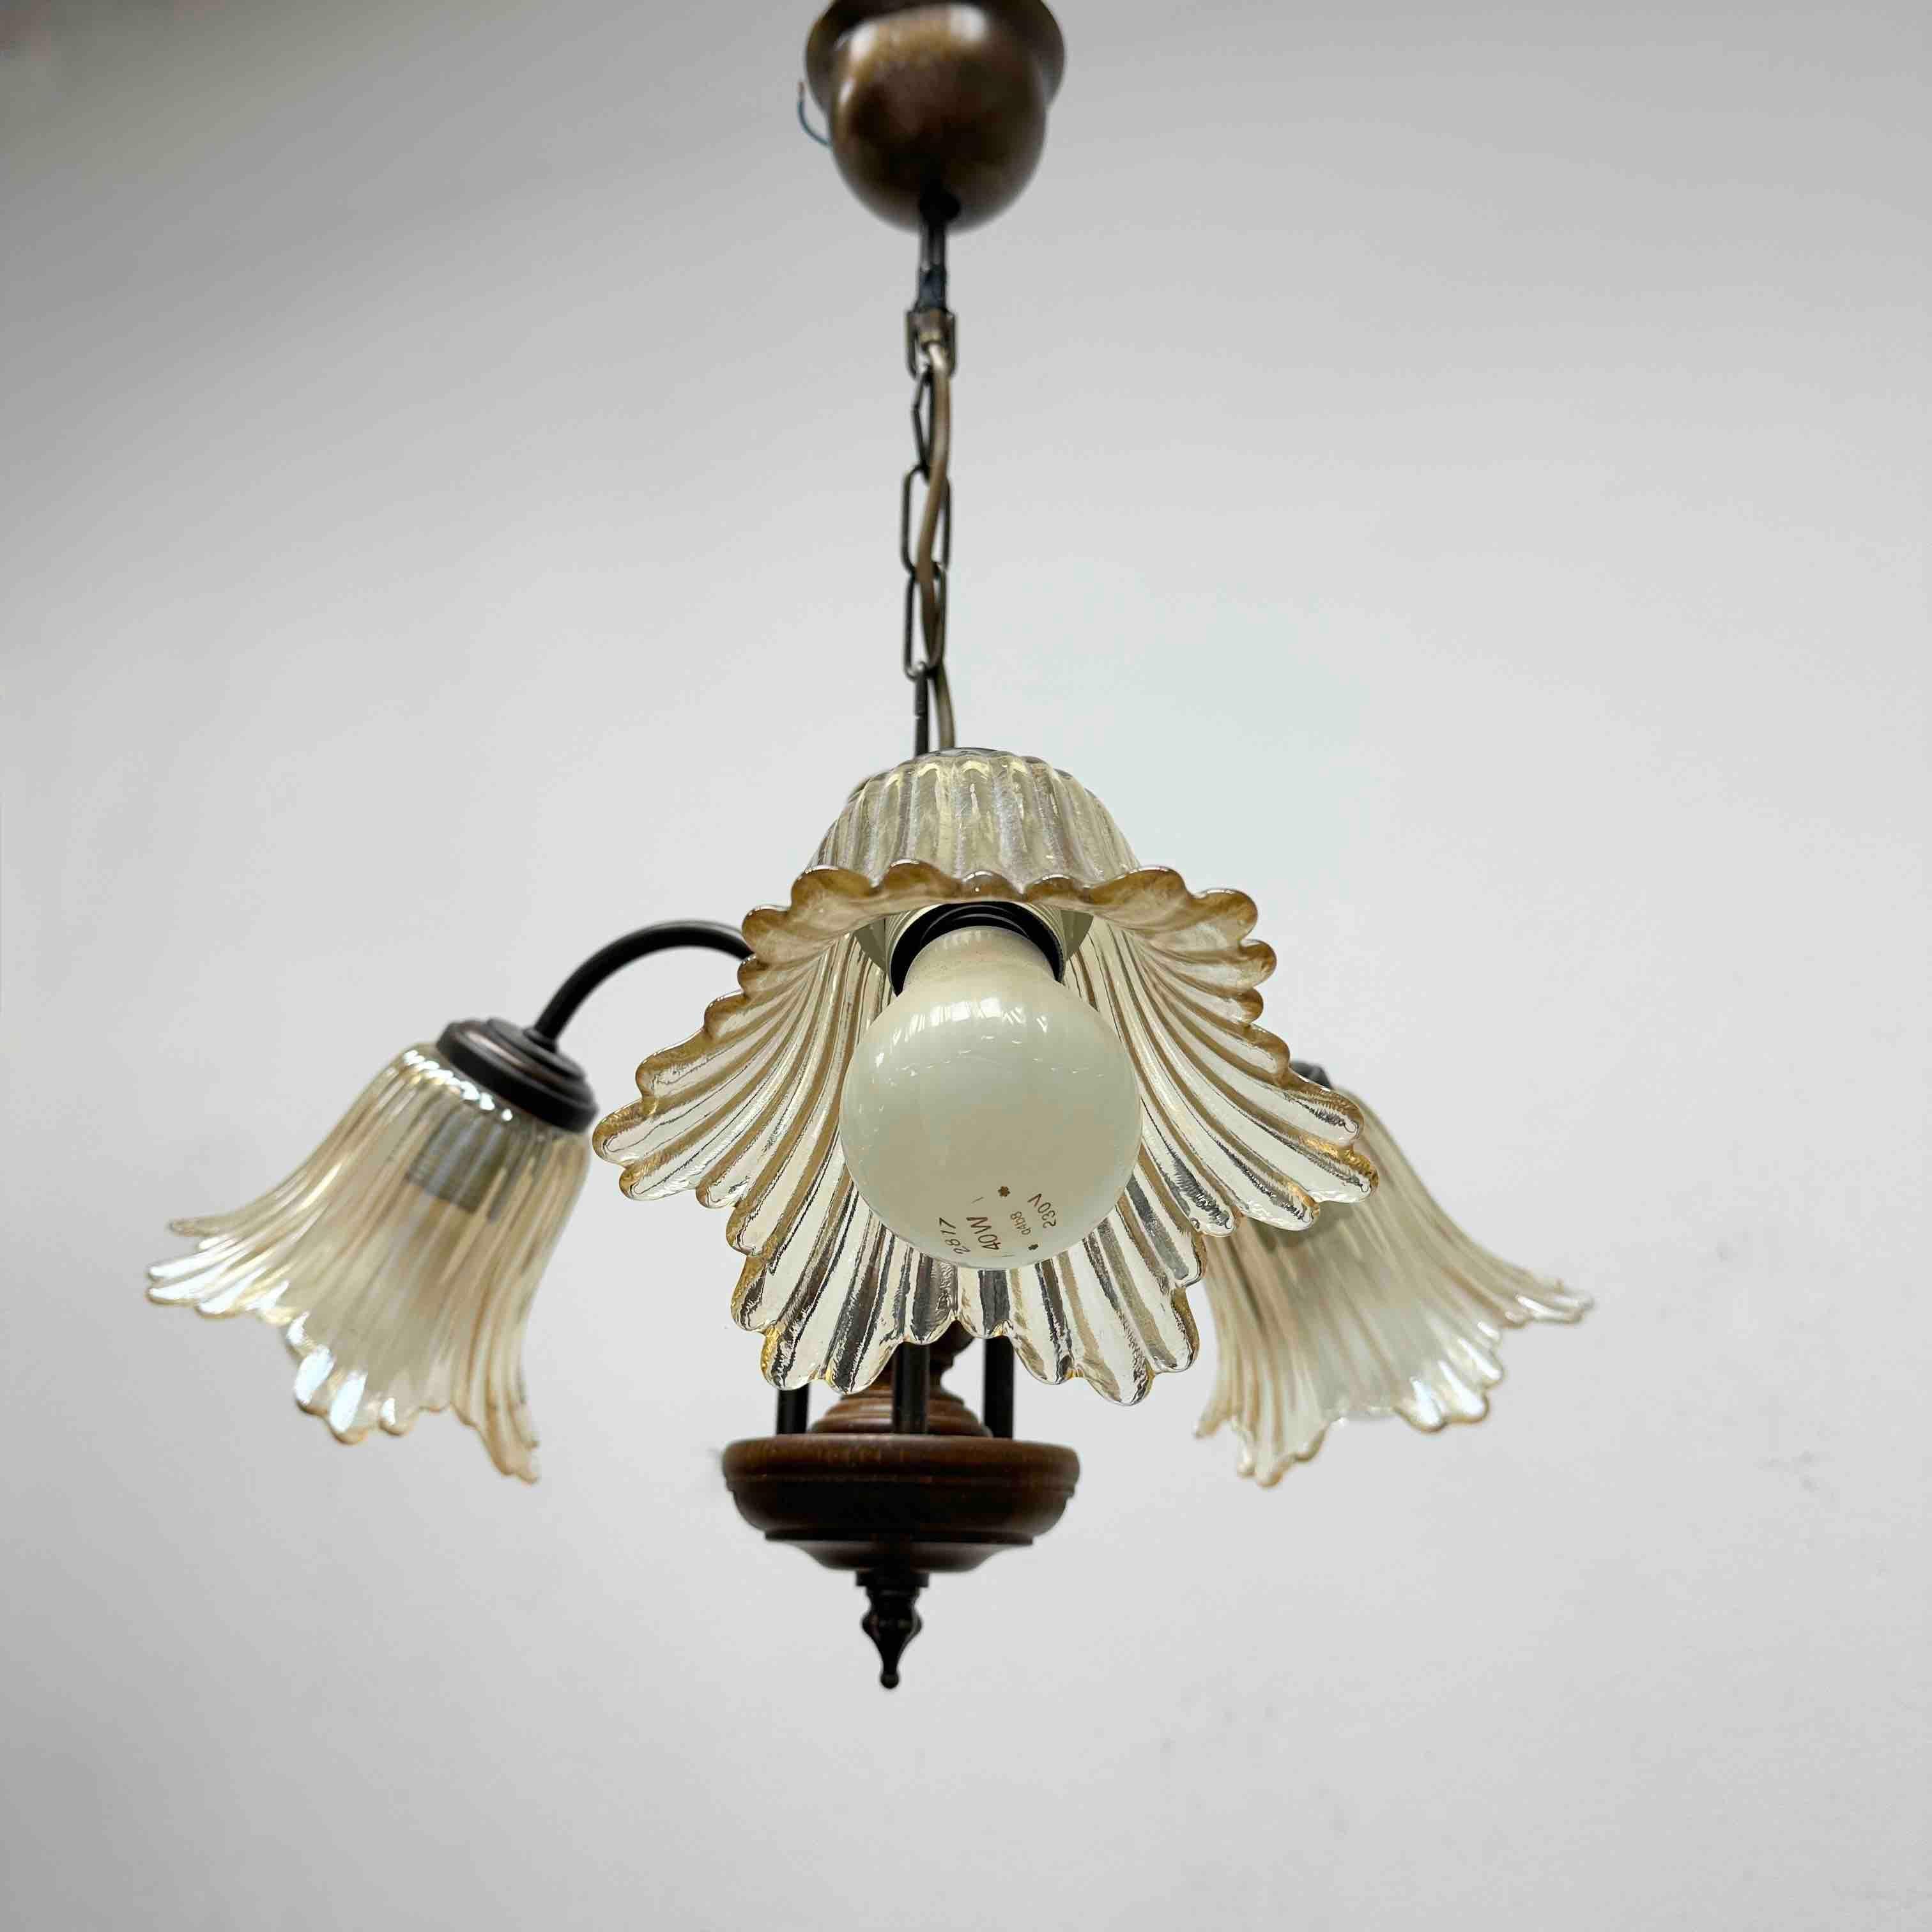 Gorgeous German Tole Wood Metal Glas Shade Three Light Chandelier, 1970s For Sale 3